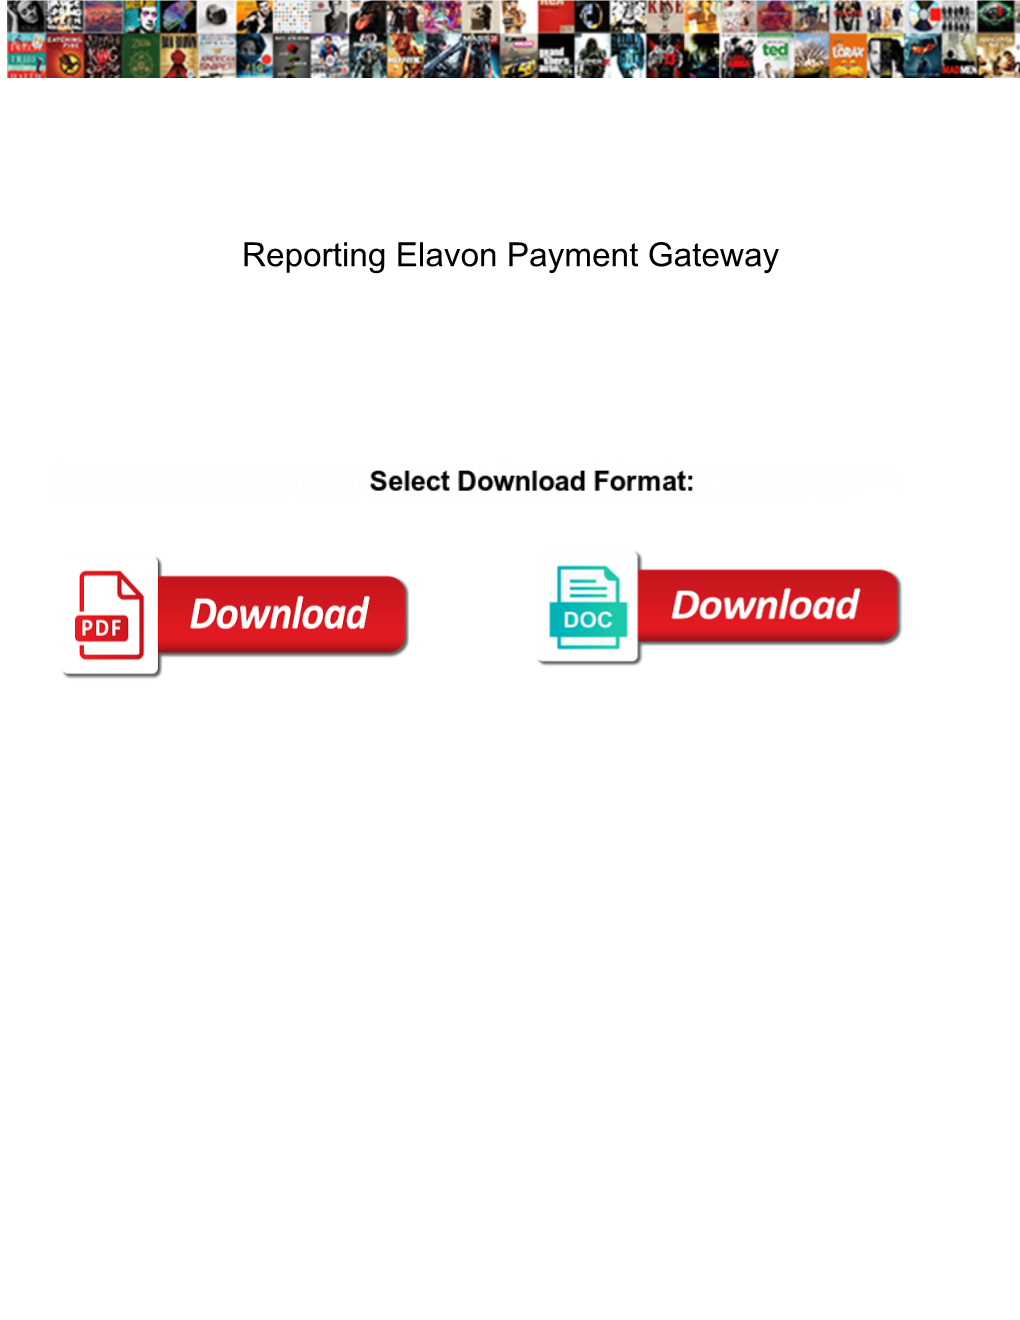 Reporting Elavon Payment Gateway